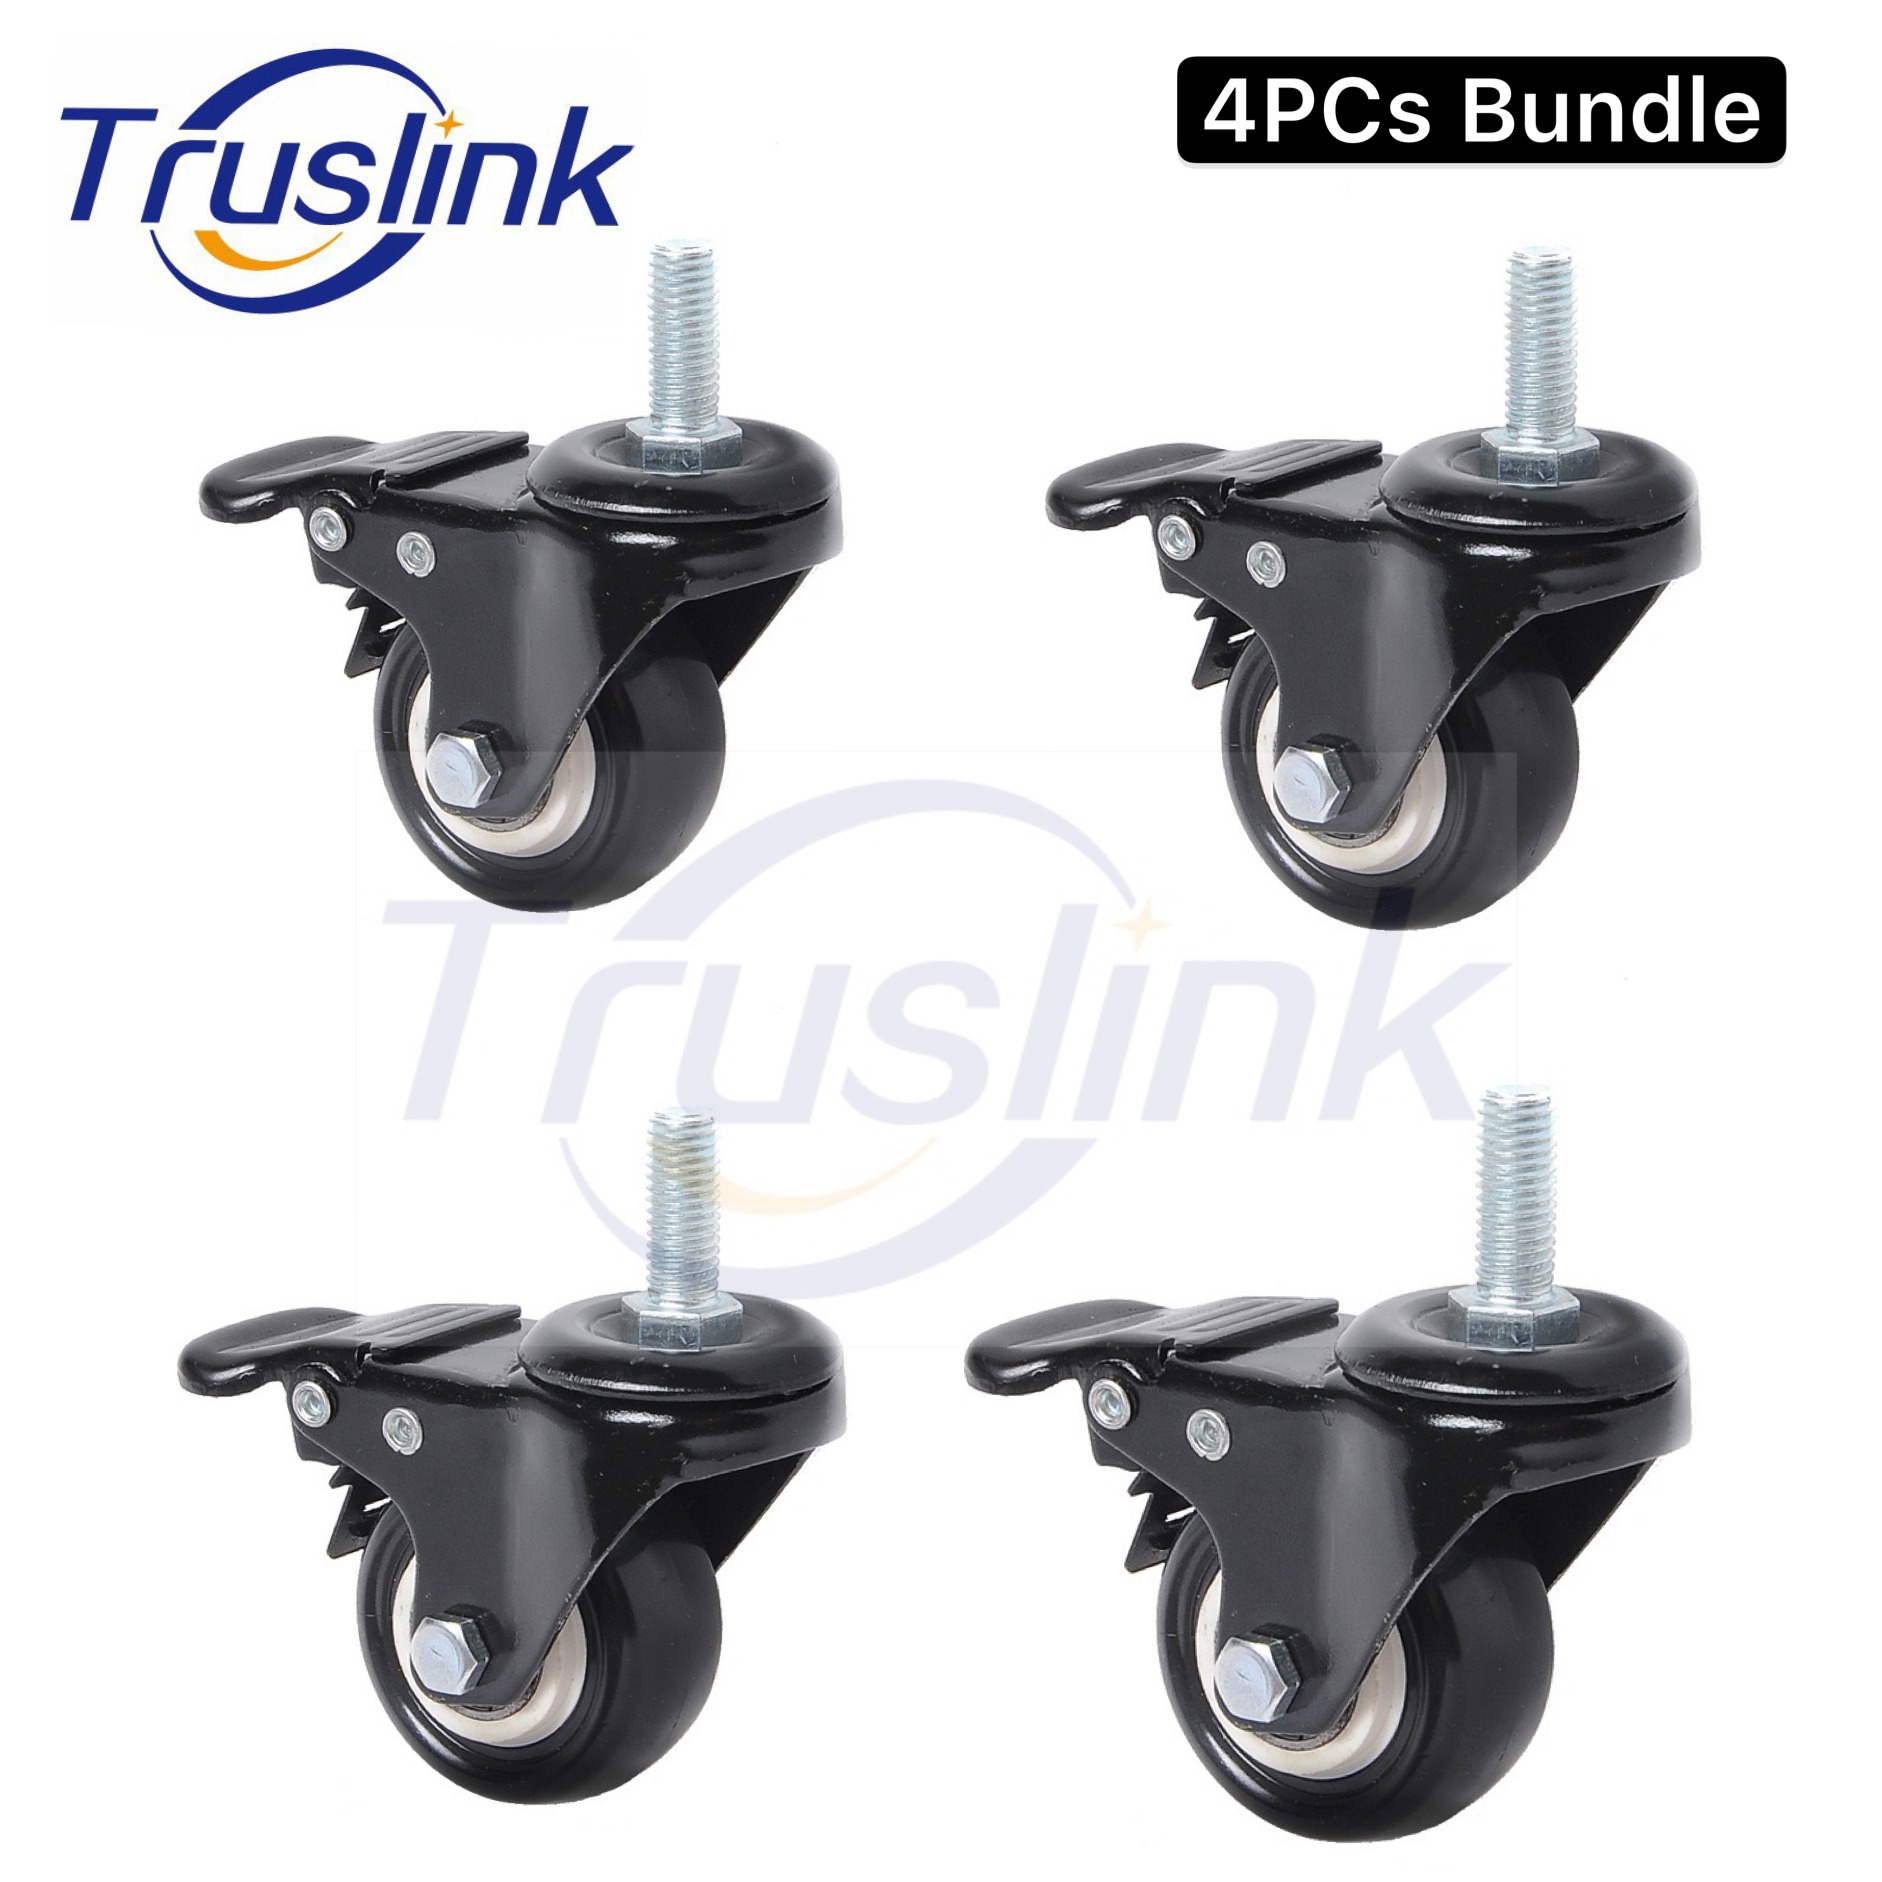 Details about   8 Pcs 2 Inch Swivel Caster Wheels Nylon Threaded Stem with Brake 39lb Capacity 